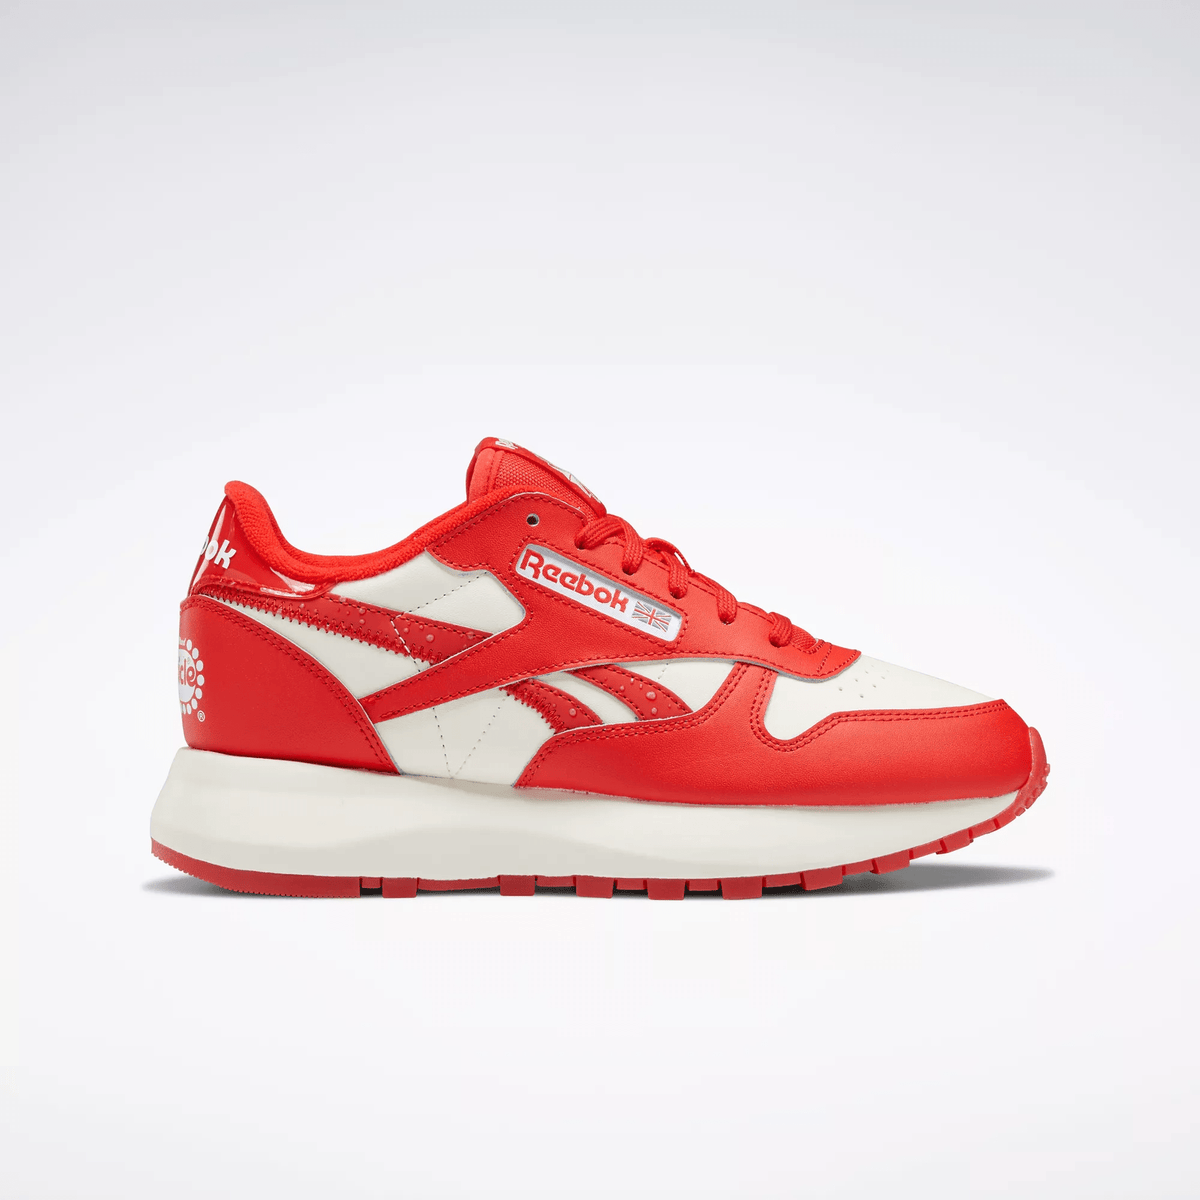 Reebok Women's Popsicle Classic Leather SP Shoes Red